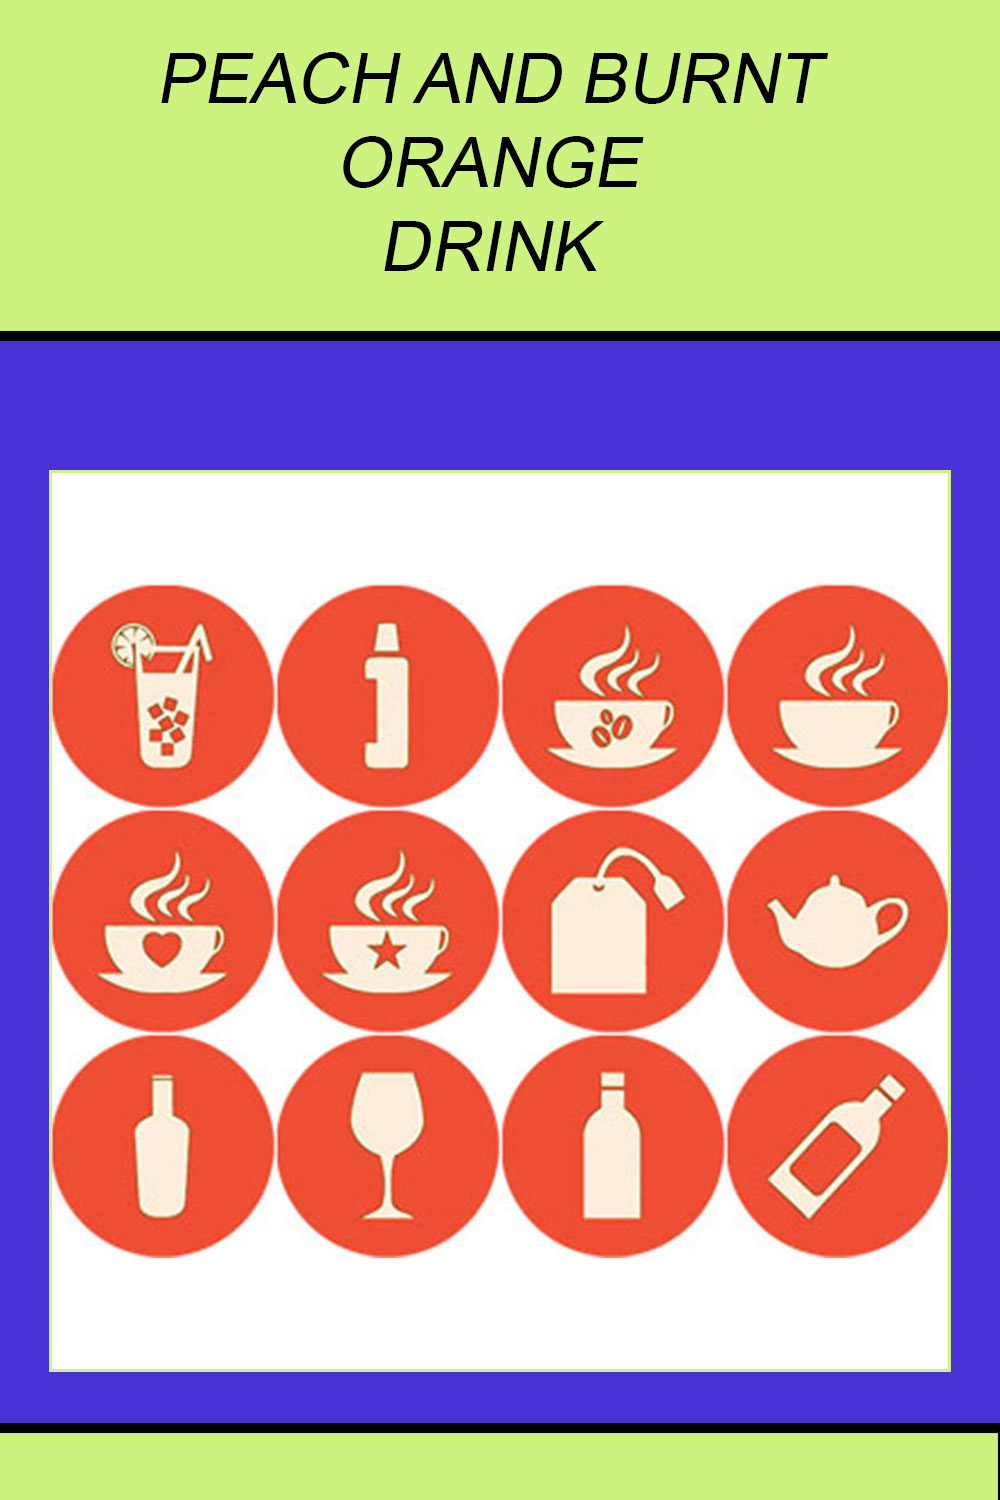 PEACH AND BURNT ORANGE DRINK ROUND ICONS pinterest preview image.